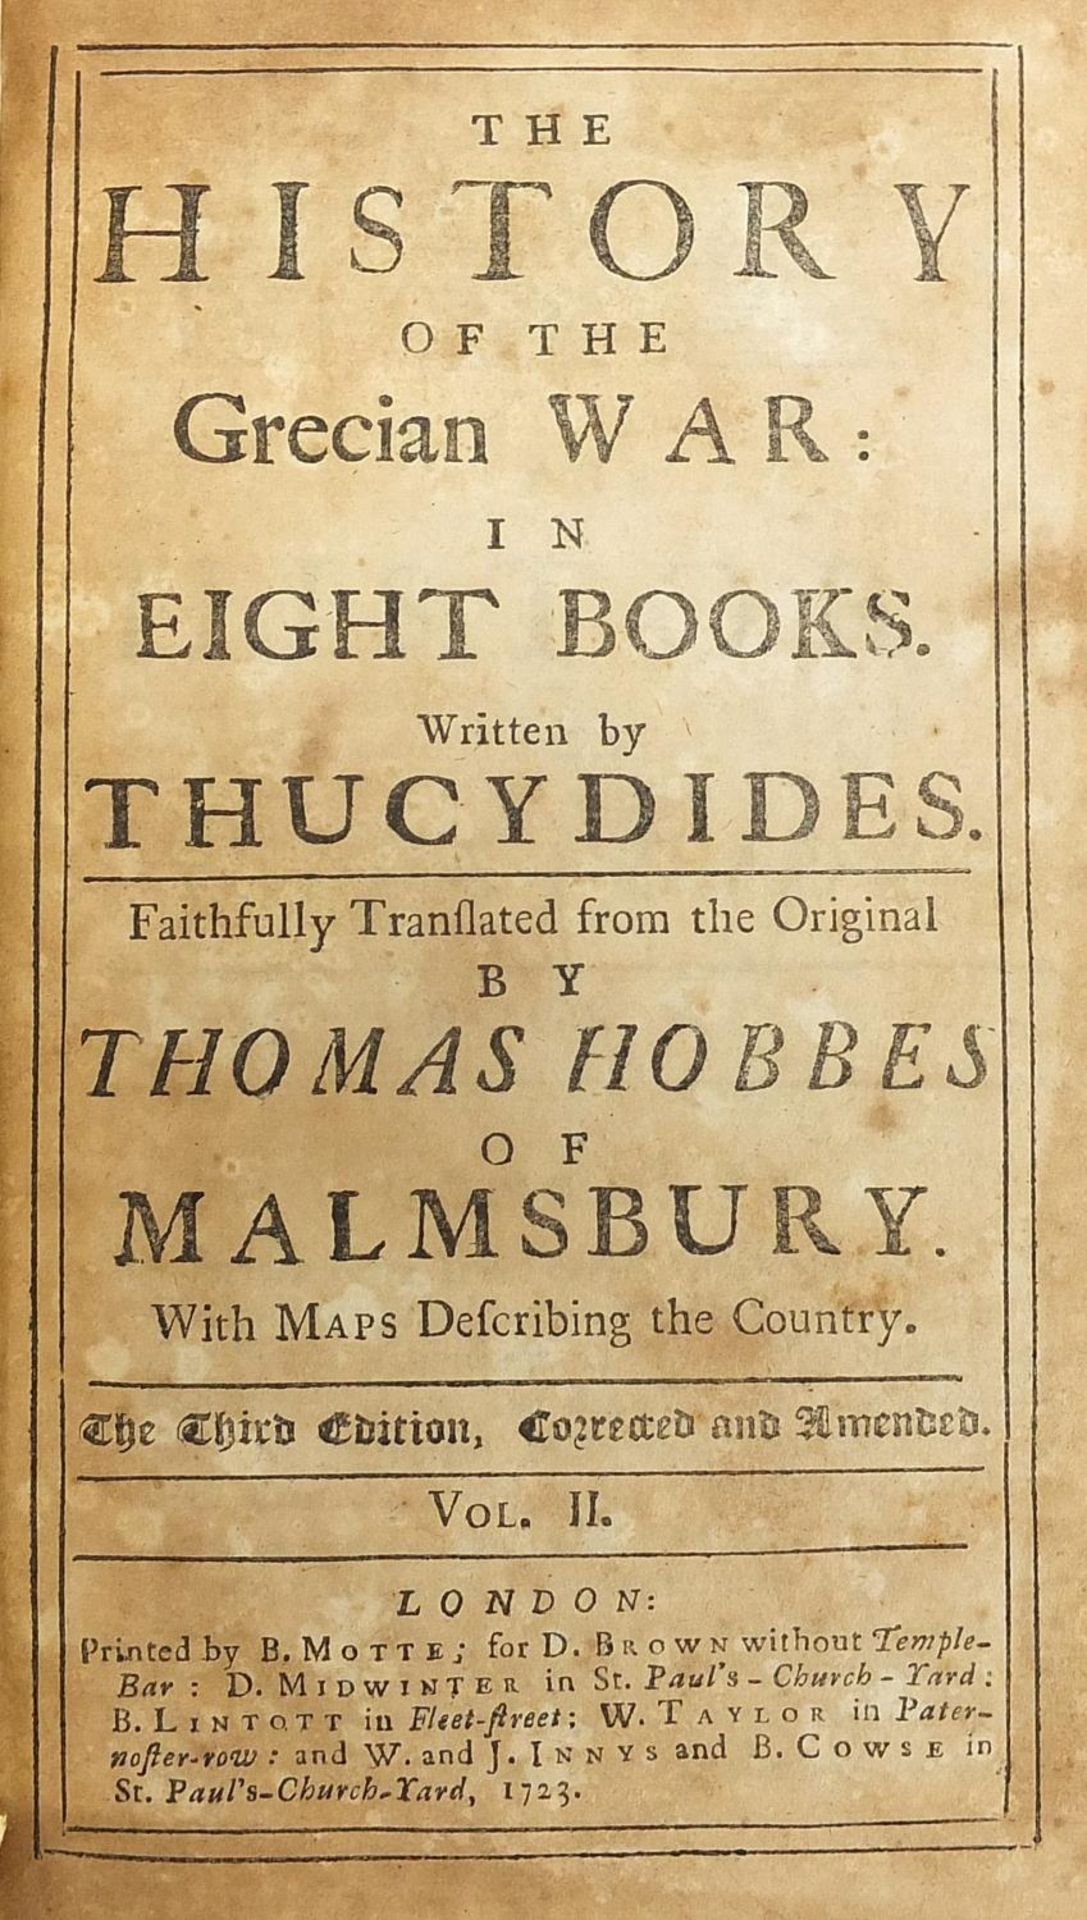 The History of the Grecian War in Eight Books written by Thucydides by Thomas Hobbes of Malmsbury, - Image 2 of 3